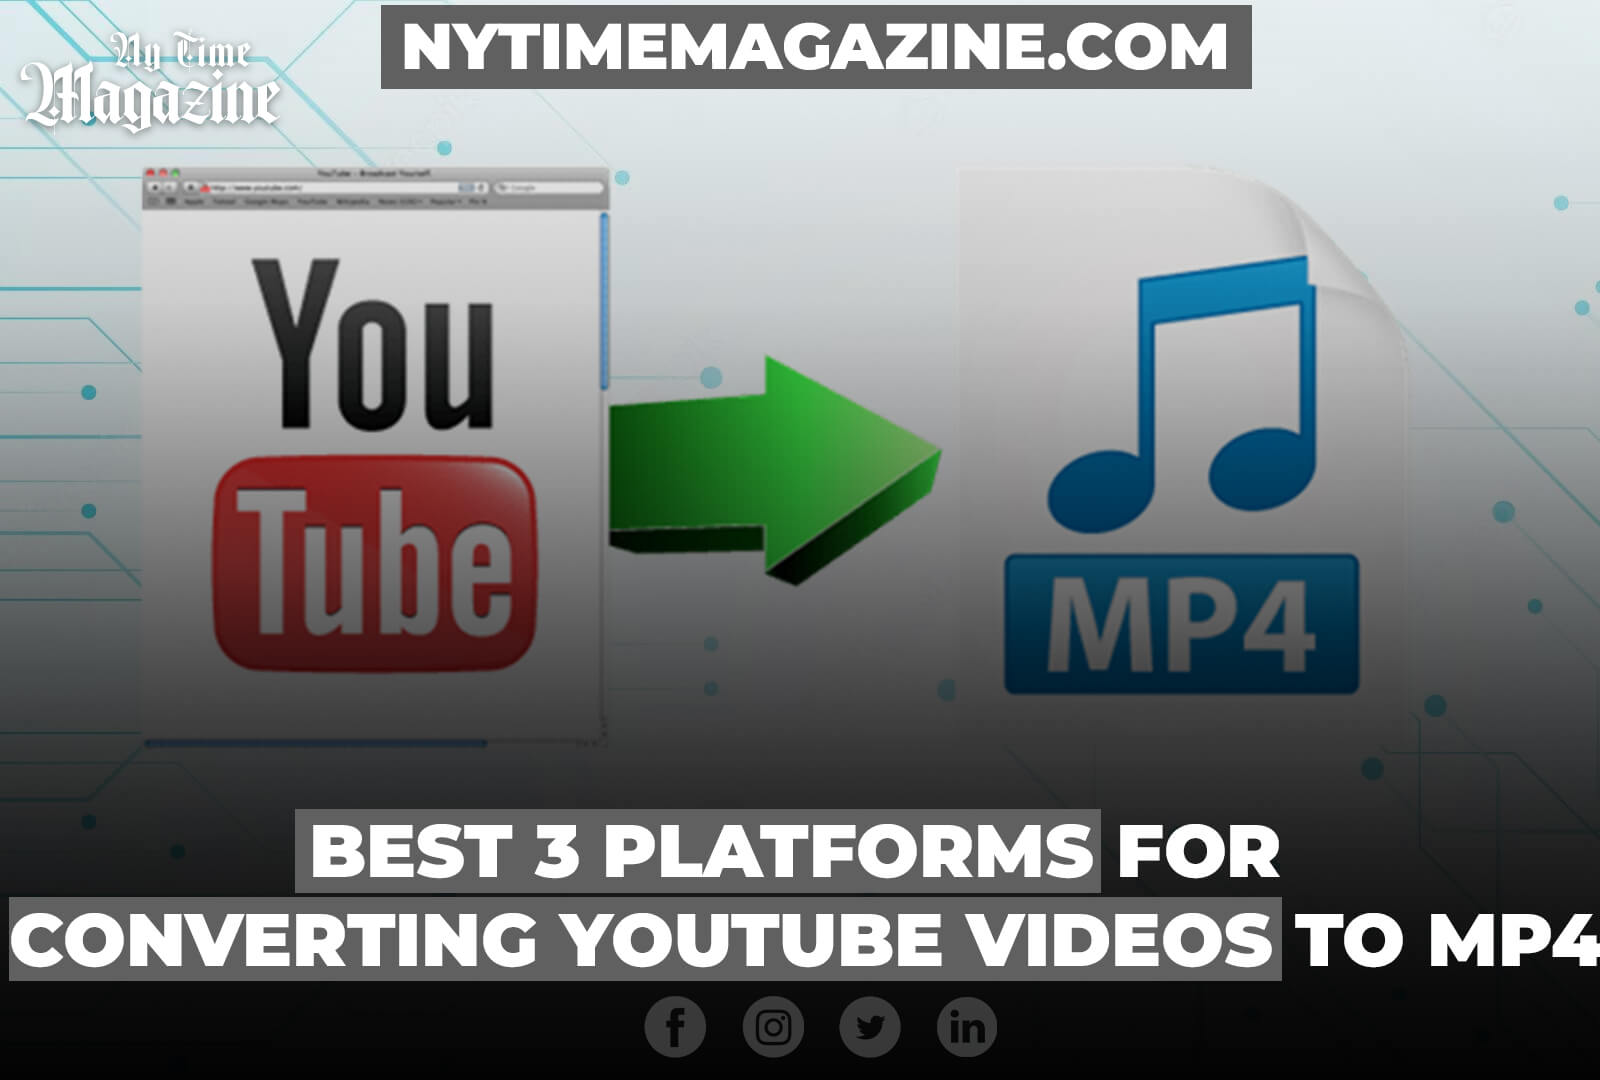 BEST 3 PLATFORMS FOR CONVERTING YOUTUBE VIDEOS TO MP4